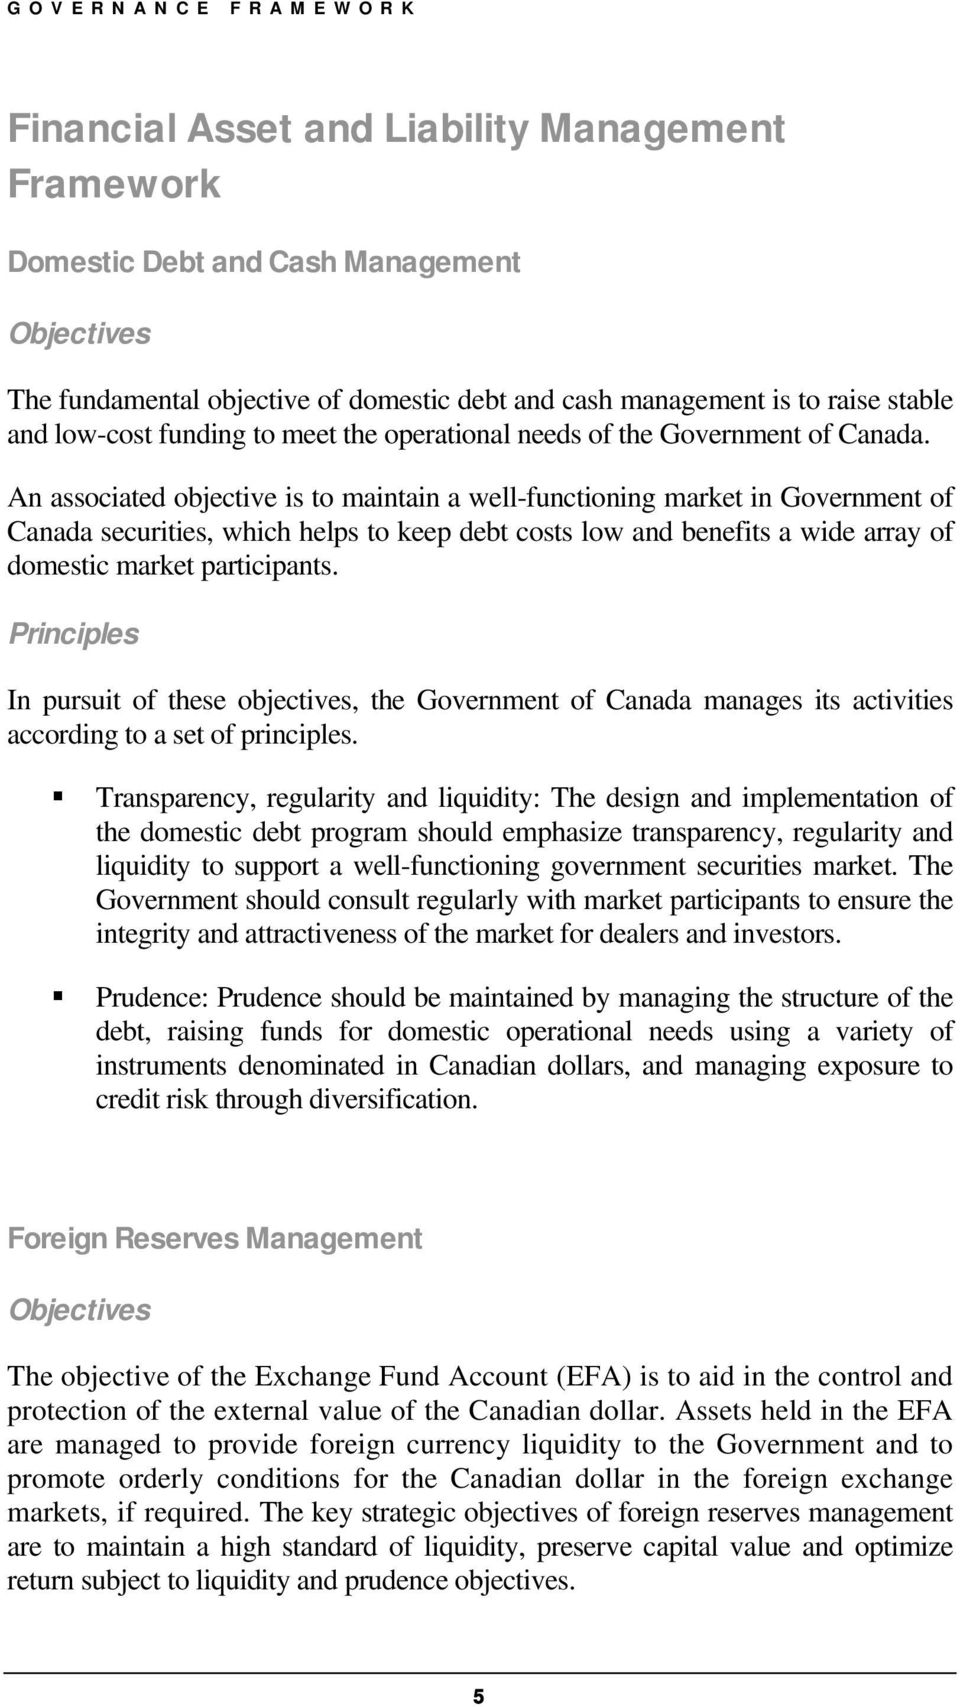 An associated objective is to maintain a well-functioning market in Government of Canada securities, which helps to keep debt costs low and benefits a wide array of domestic market participants.